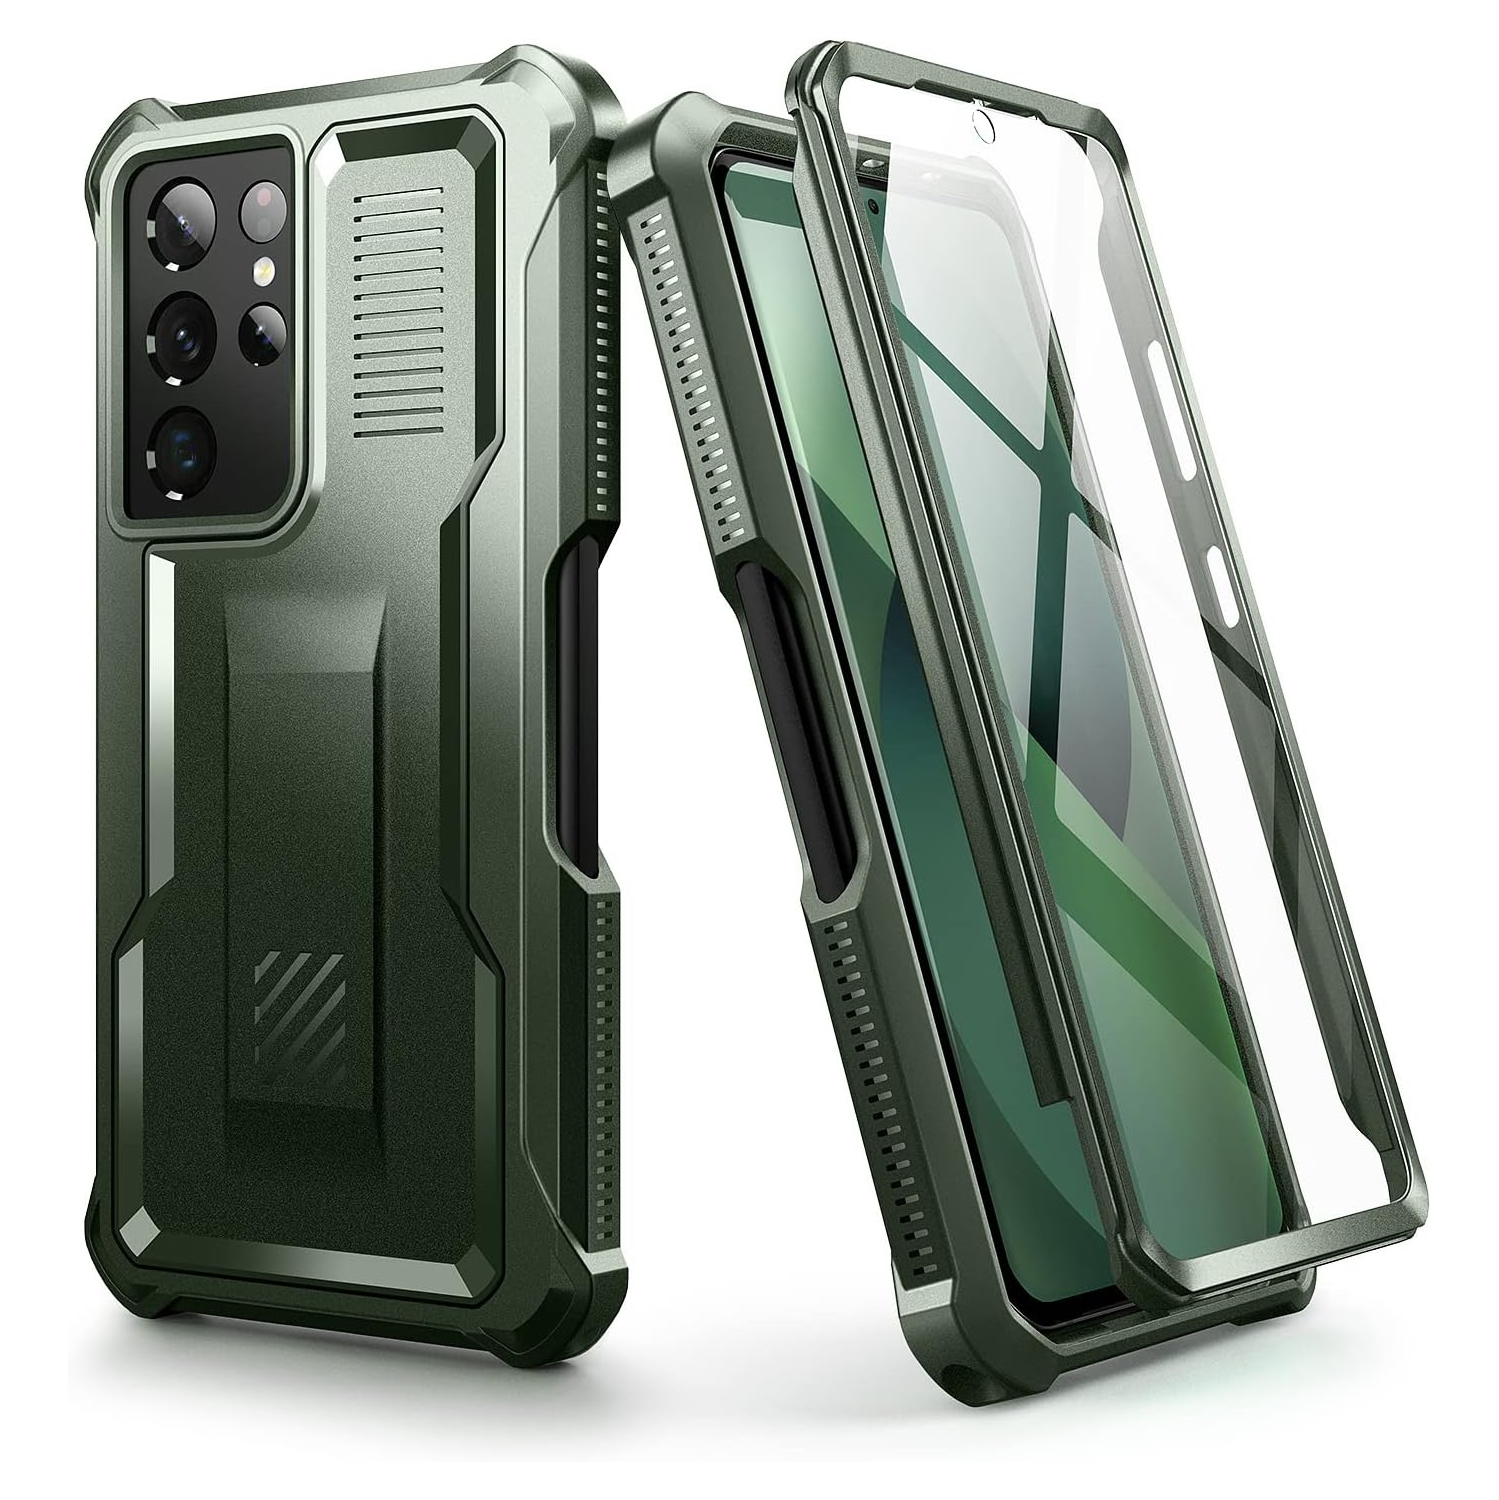 Case for Samsung Galaxy S21 Ultra with Built-in Screen Protector Military Grade Armour Heavy Duty Front and Back